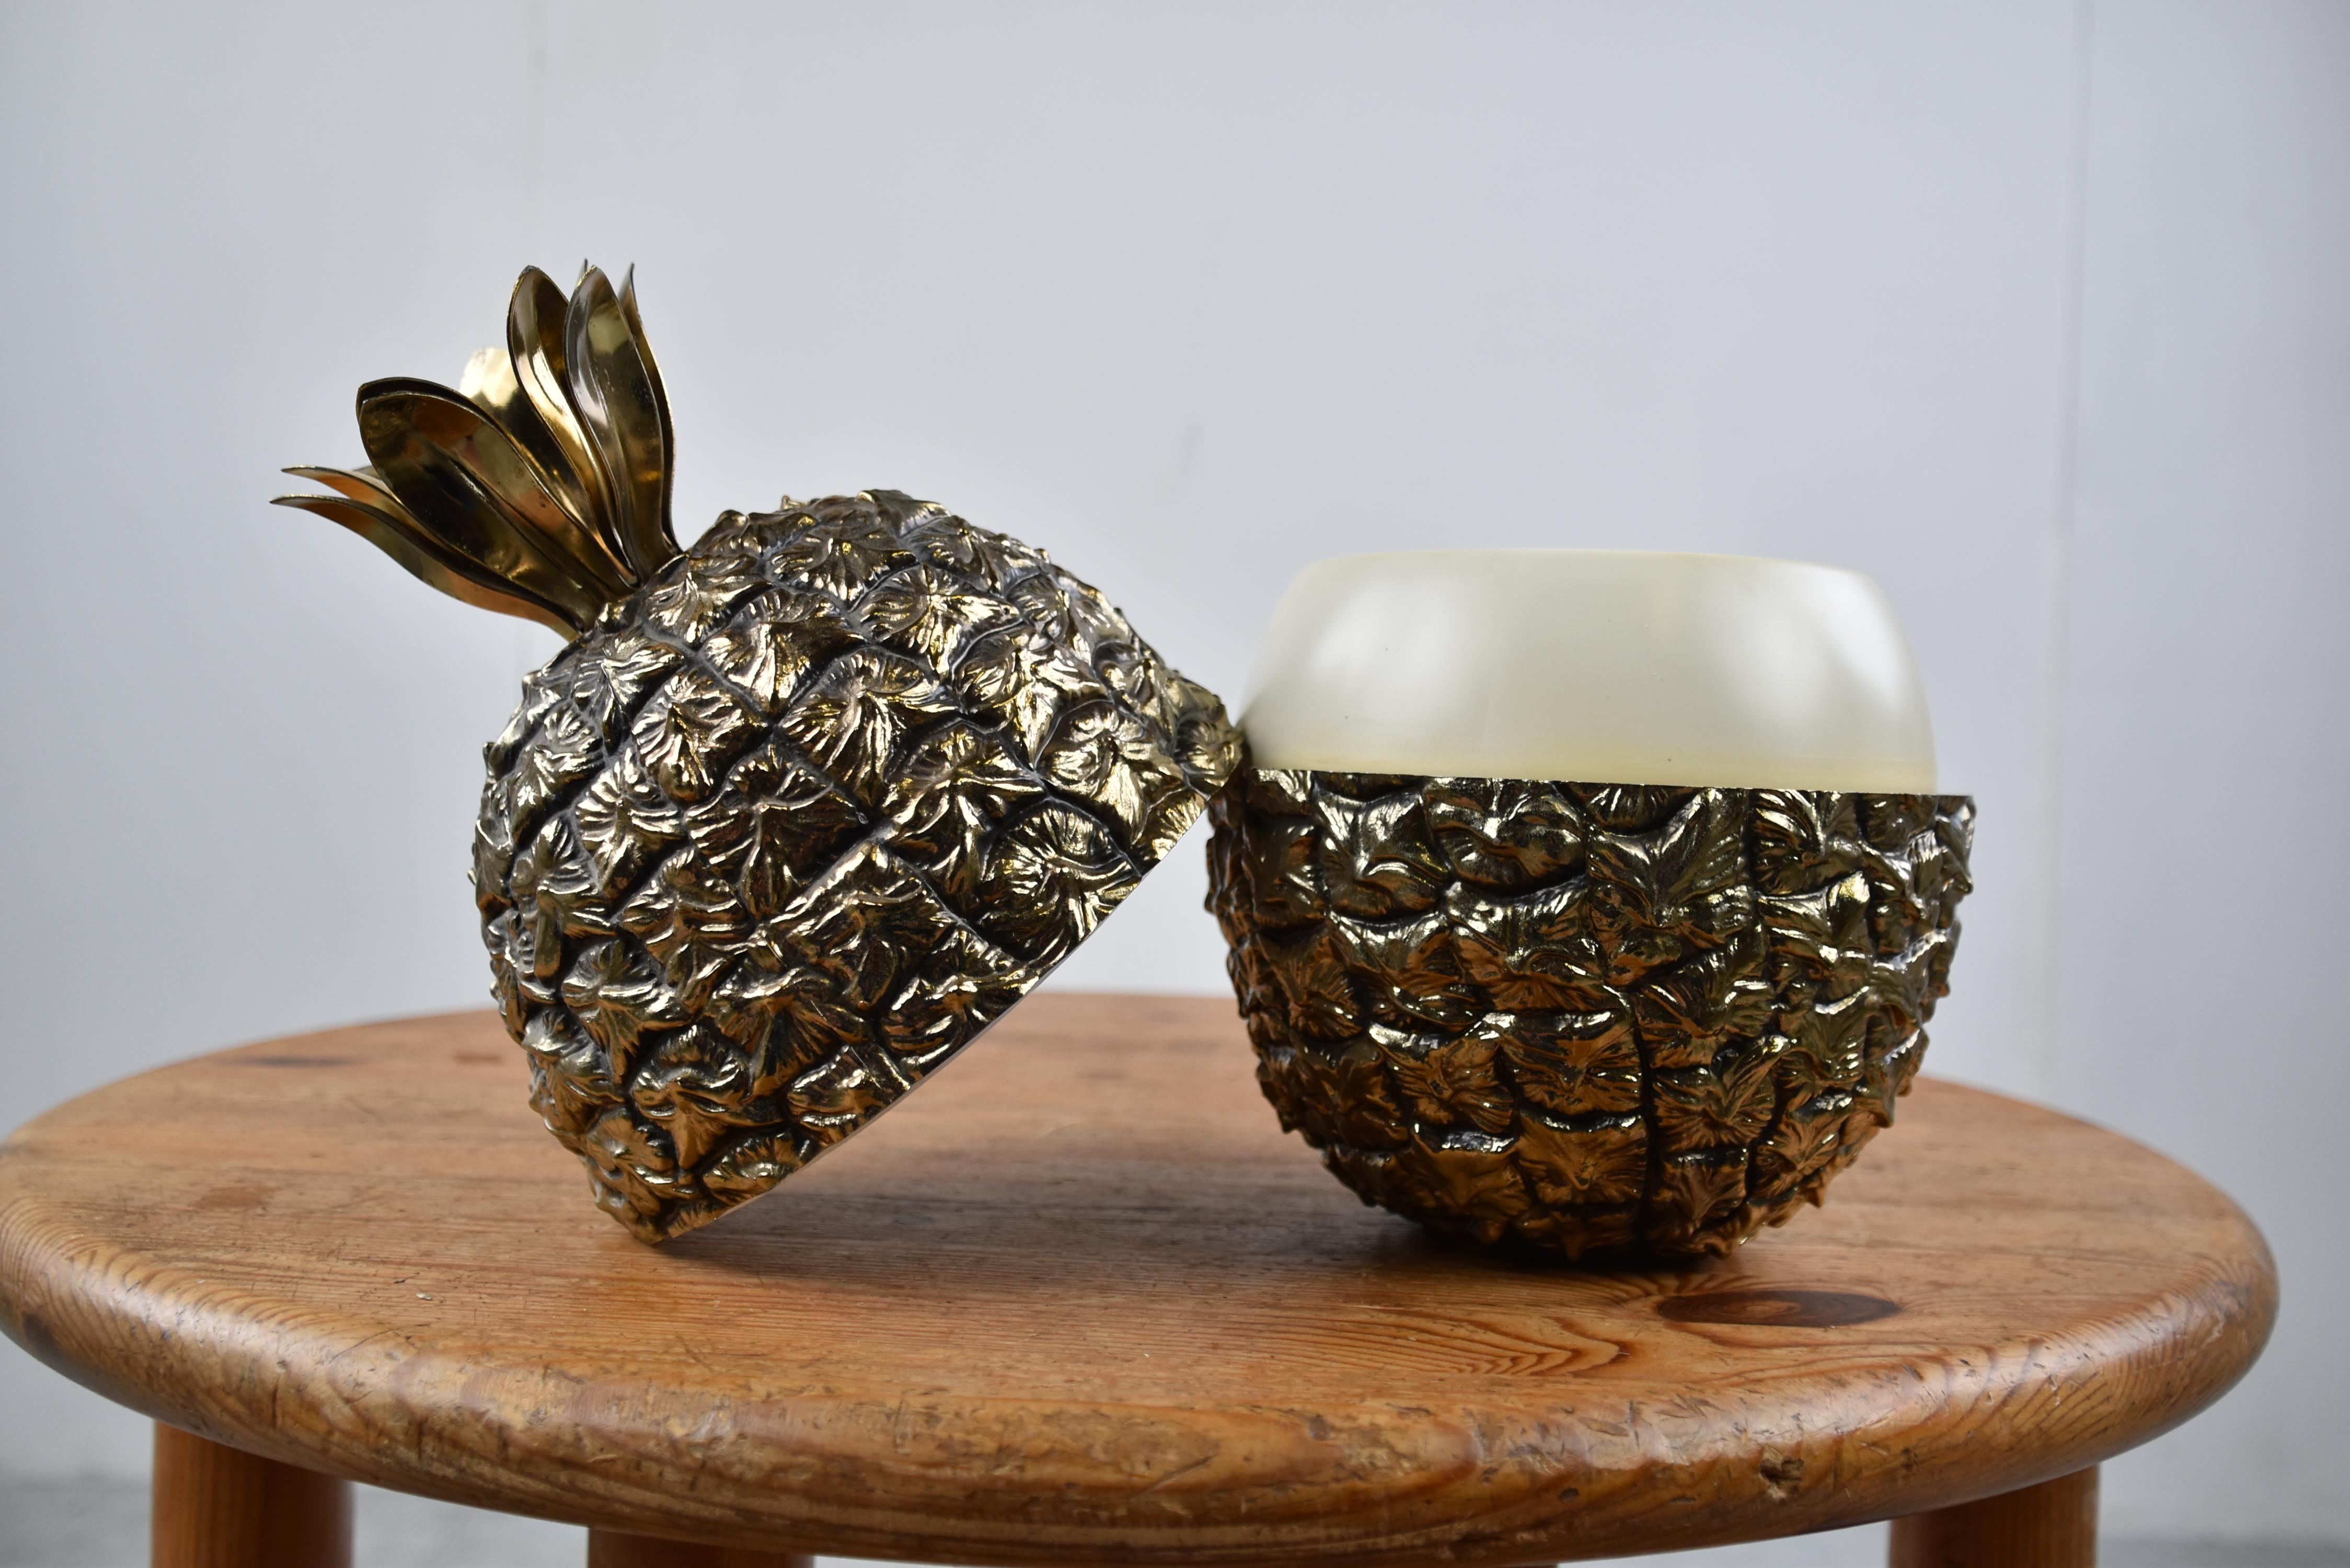 Beautiful pineapple ice bucket designed by Hans Turnwald for Freddo Therm.

This detailed pineapple like ice bucket is a beautiful luxurious appeal add-on for you bar, or as a decoration piece.

Very good condition.

1970s -